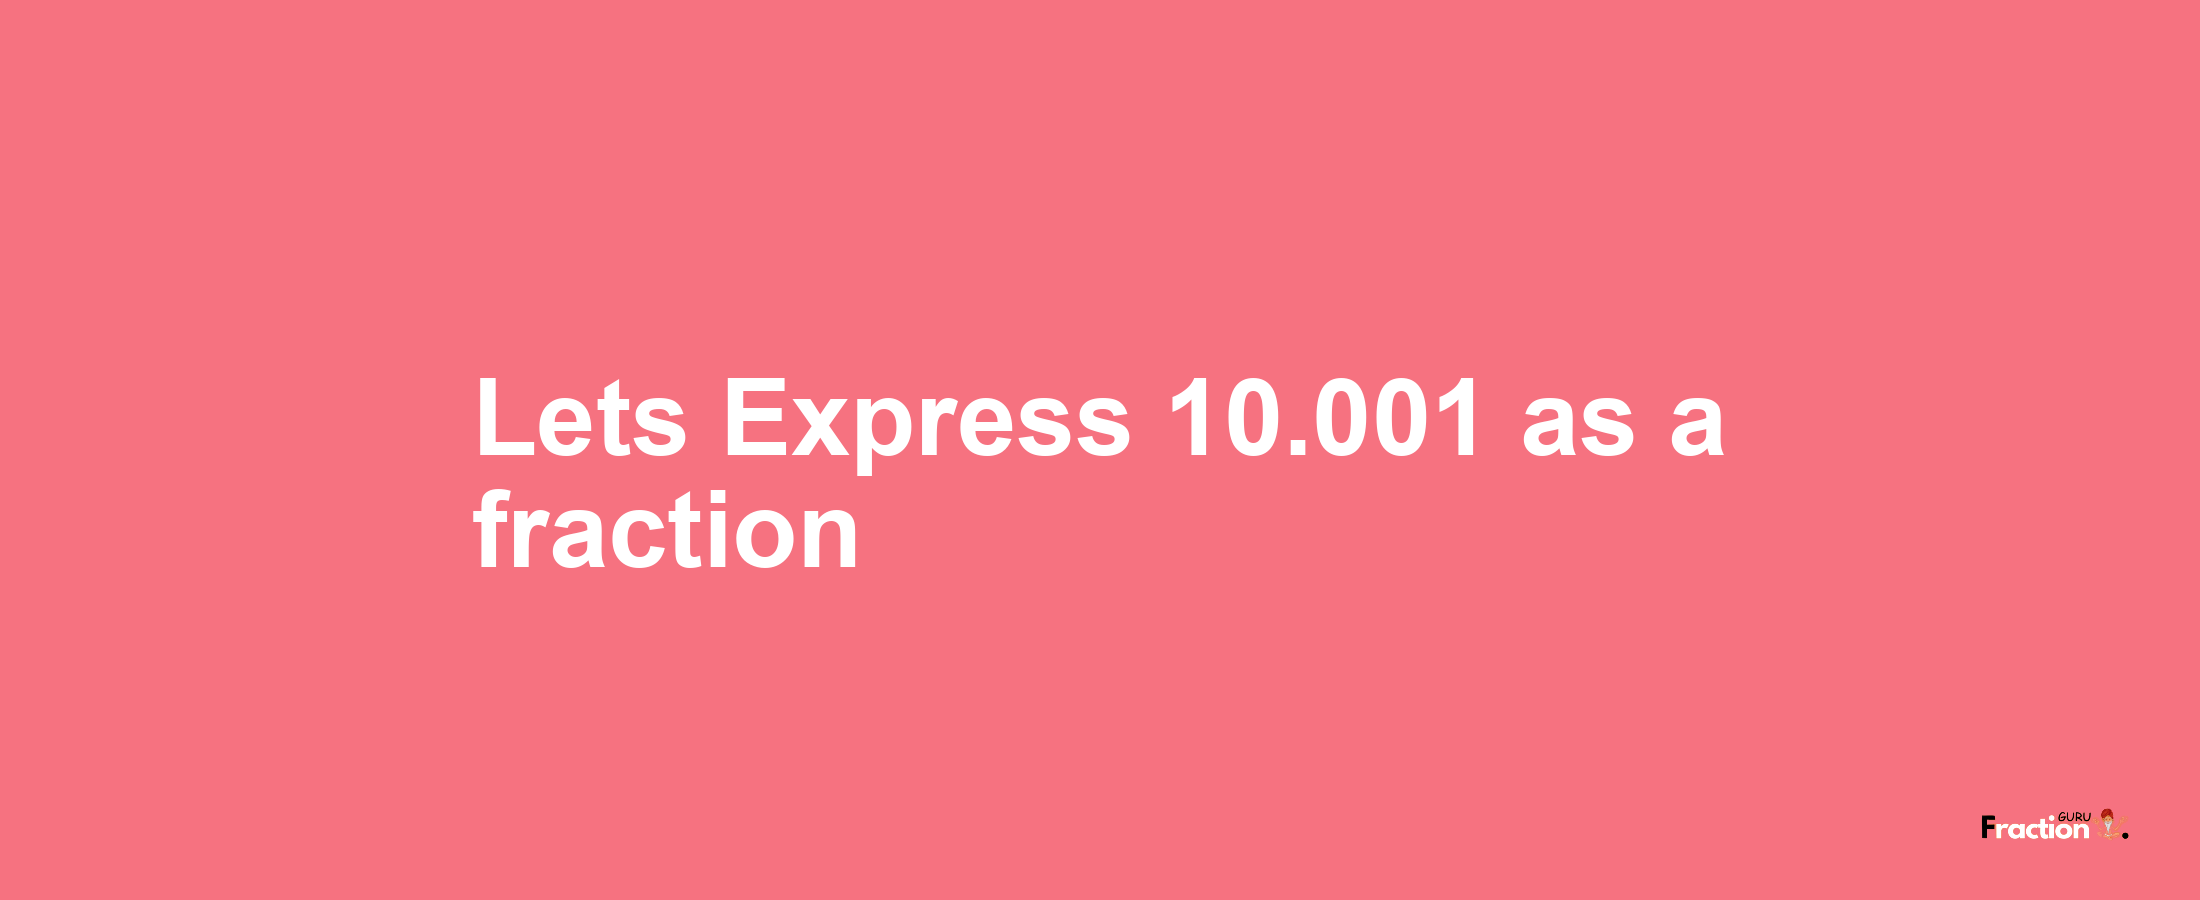 Lets Express 10.001 as afraction